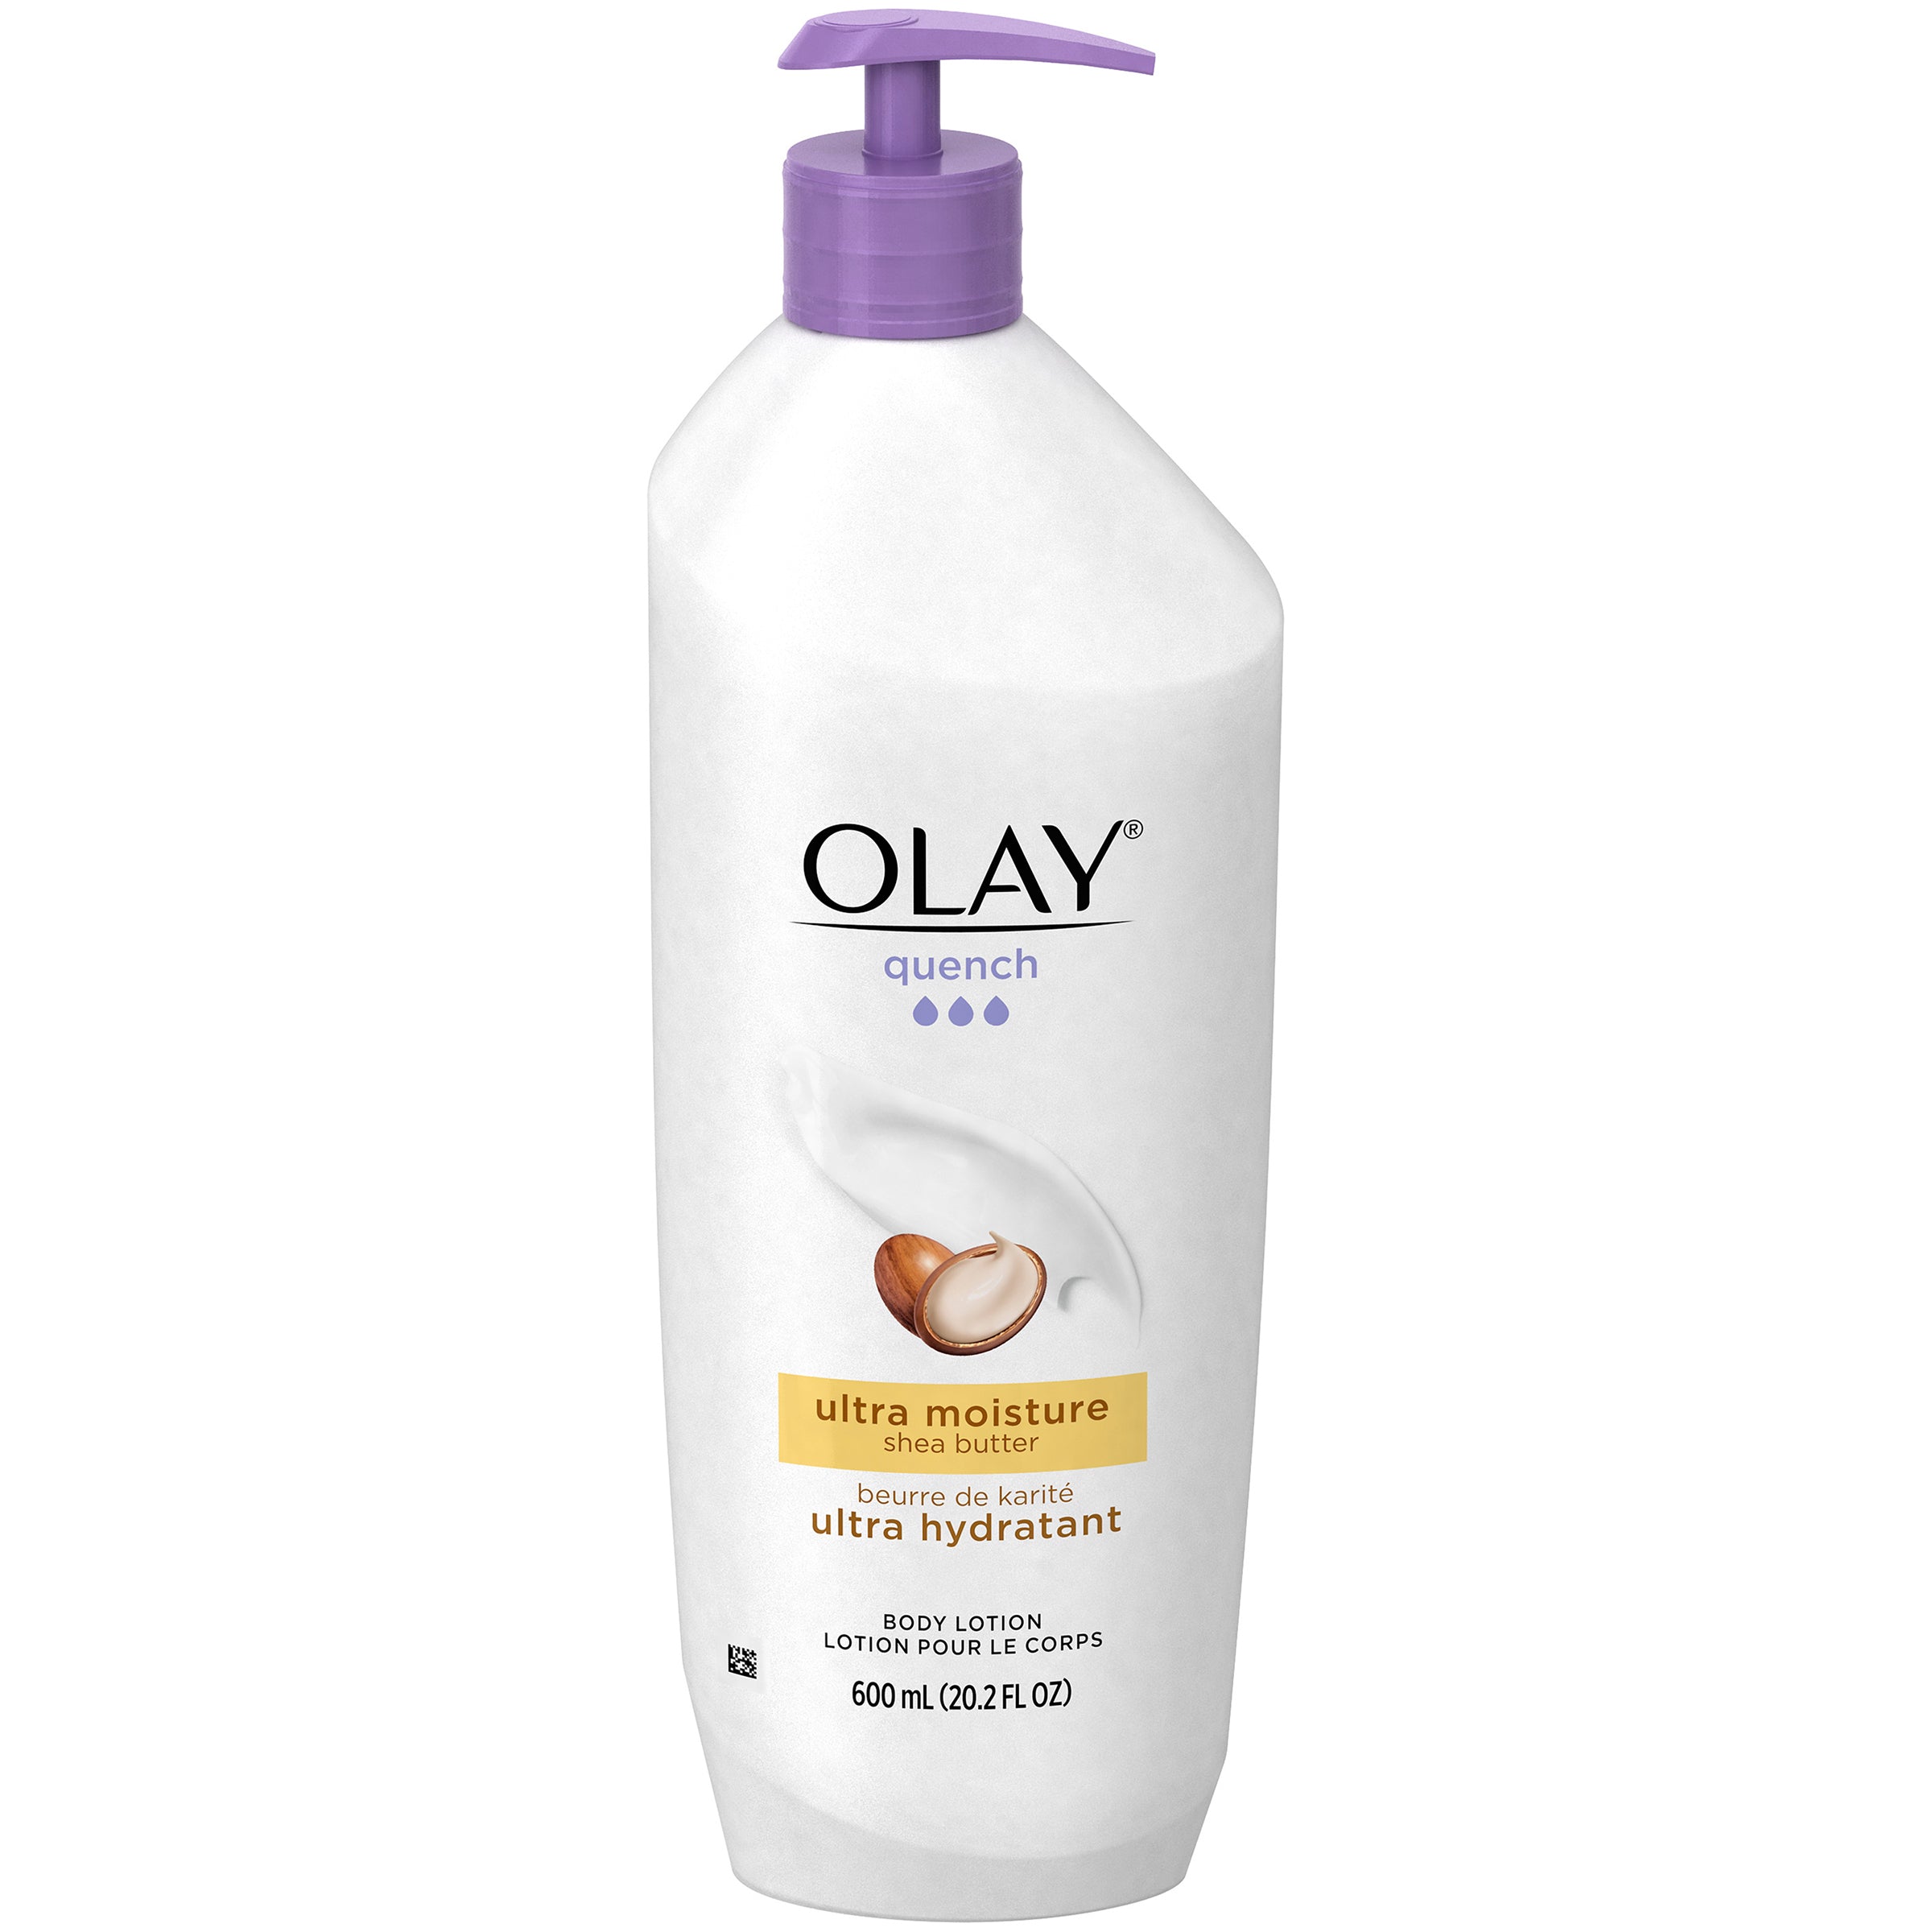 Olay Quench Ultra Moisture Shea Butter Body Lotion 20.2 fl oz